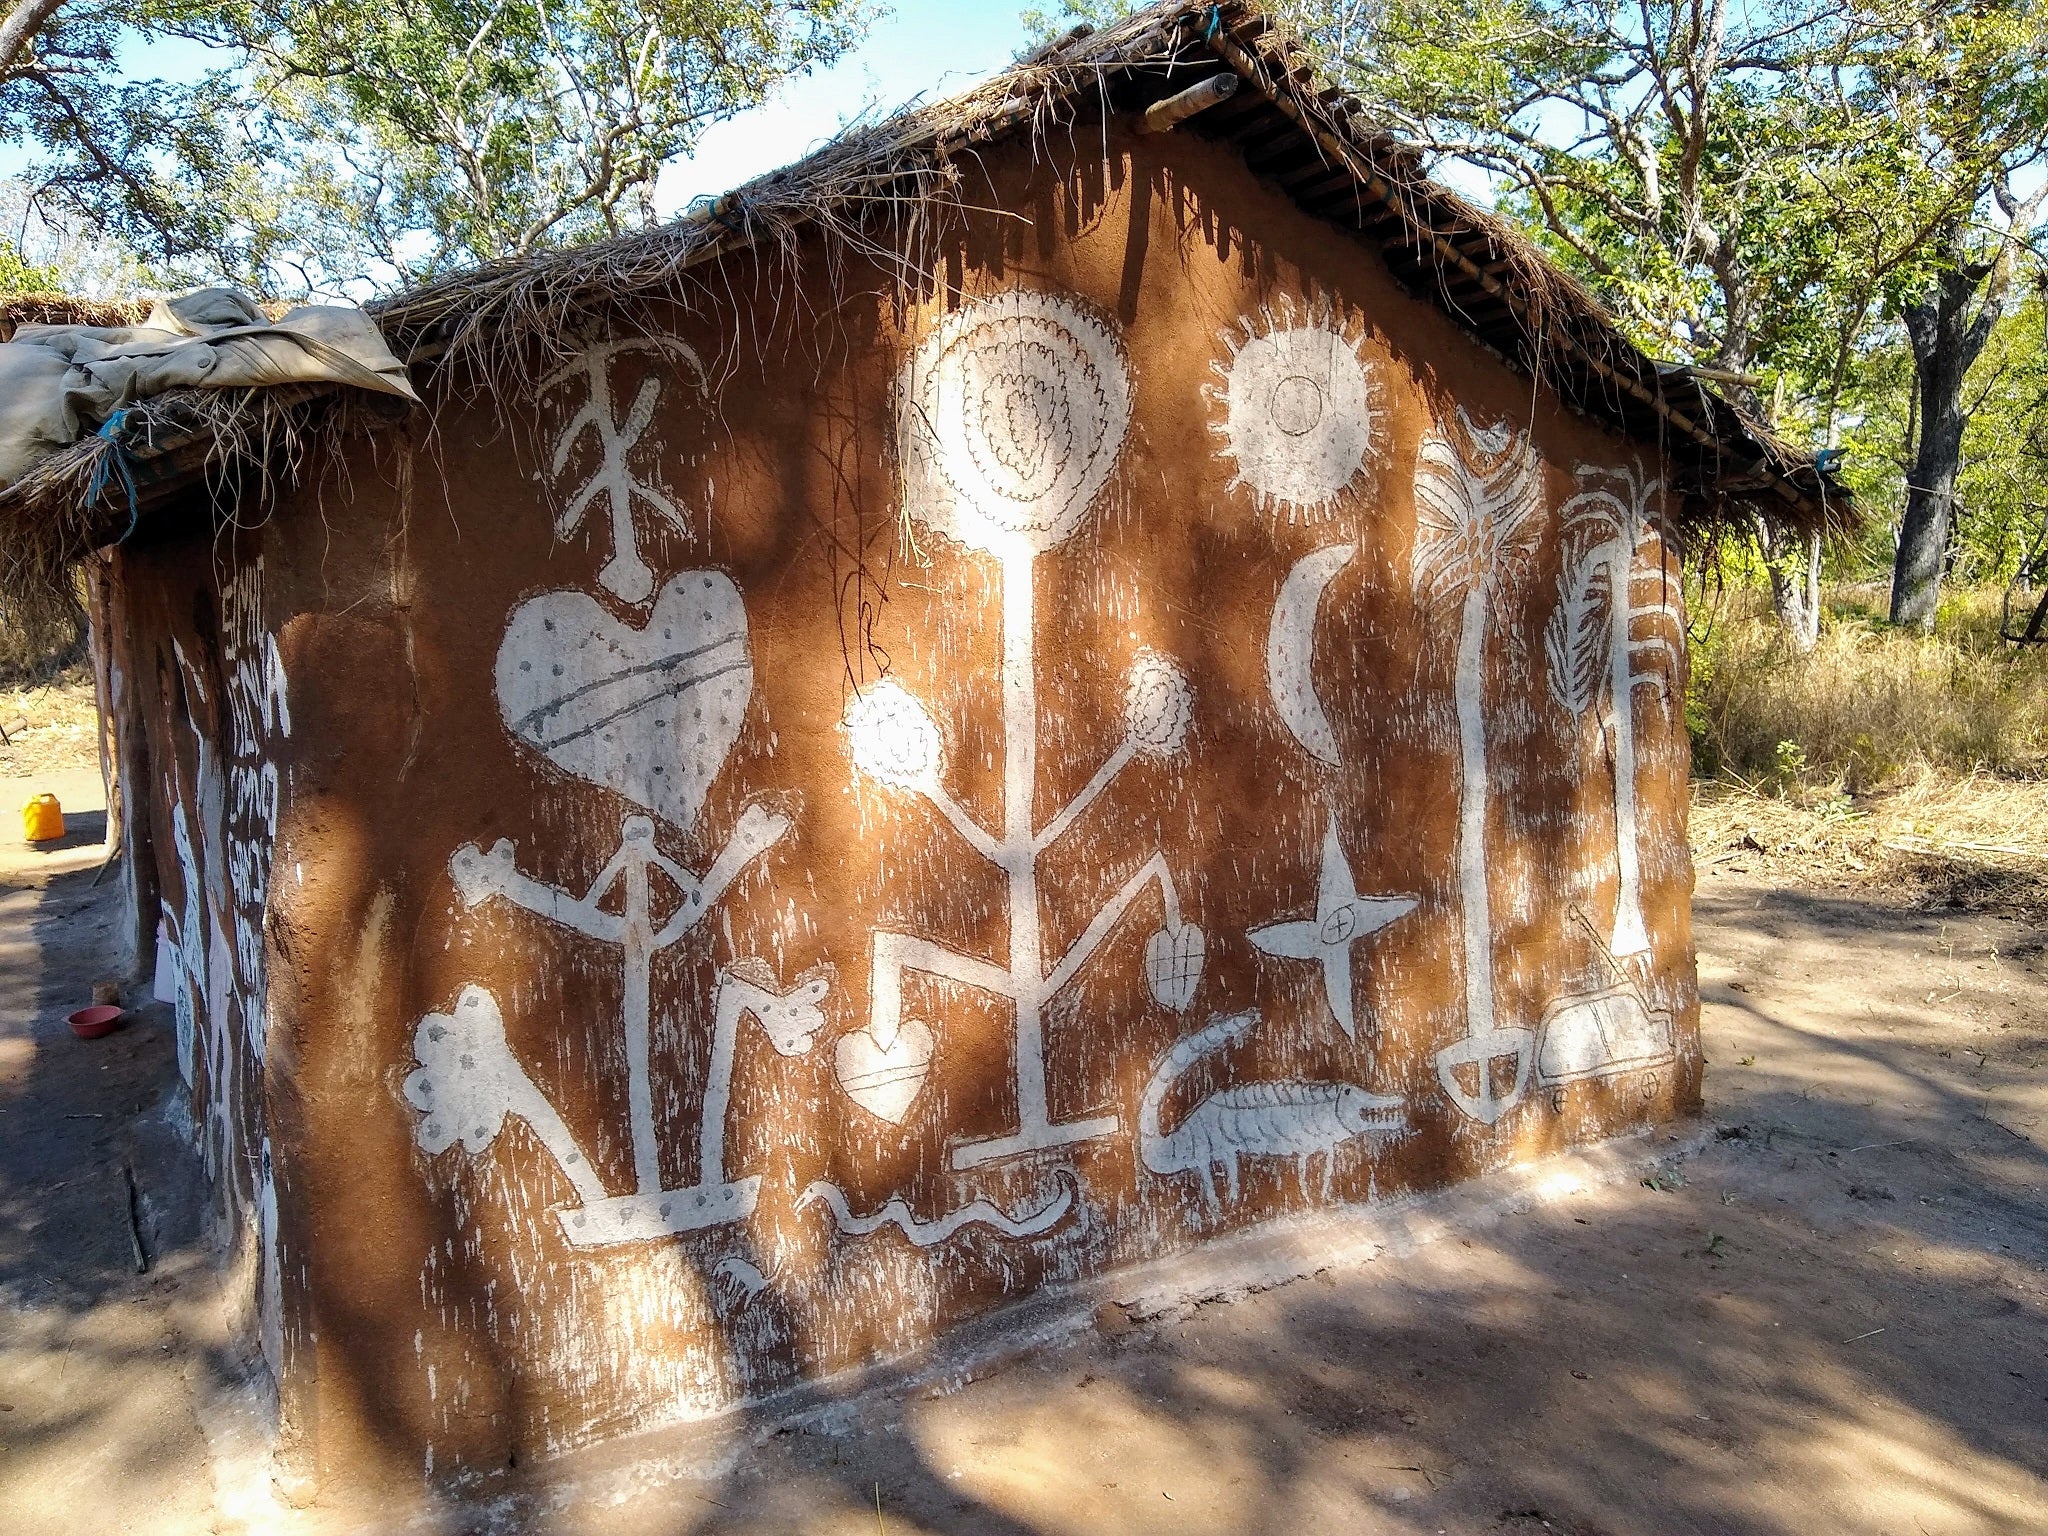 Fertility and protective symbols are painted on side of house in Mozambique